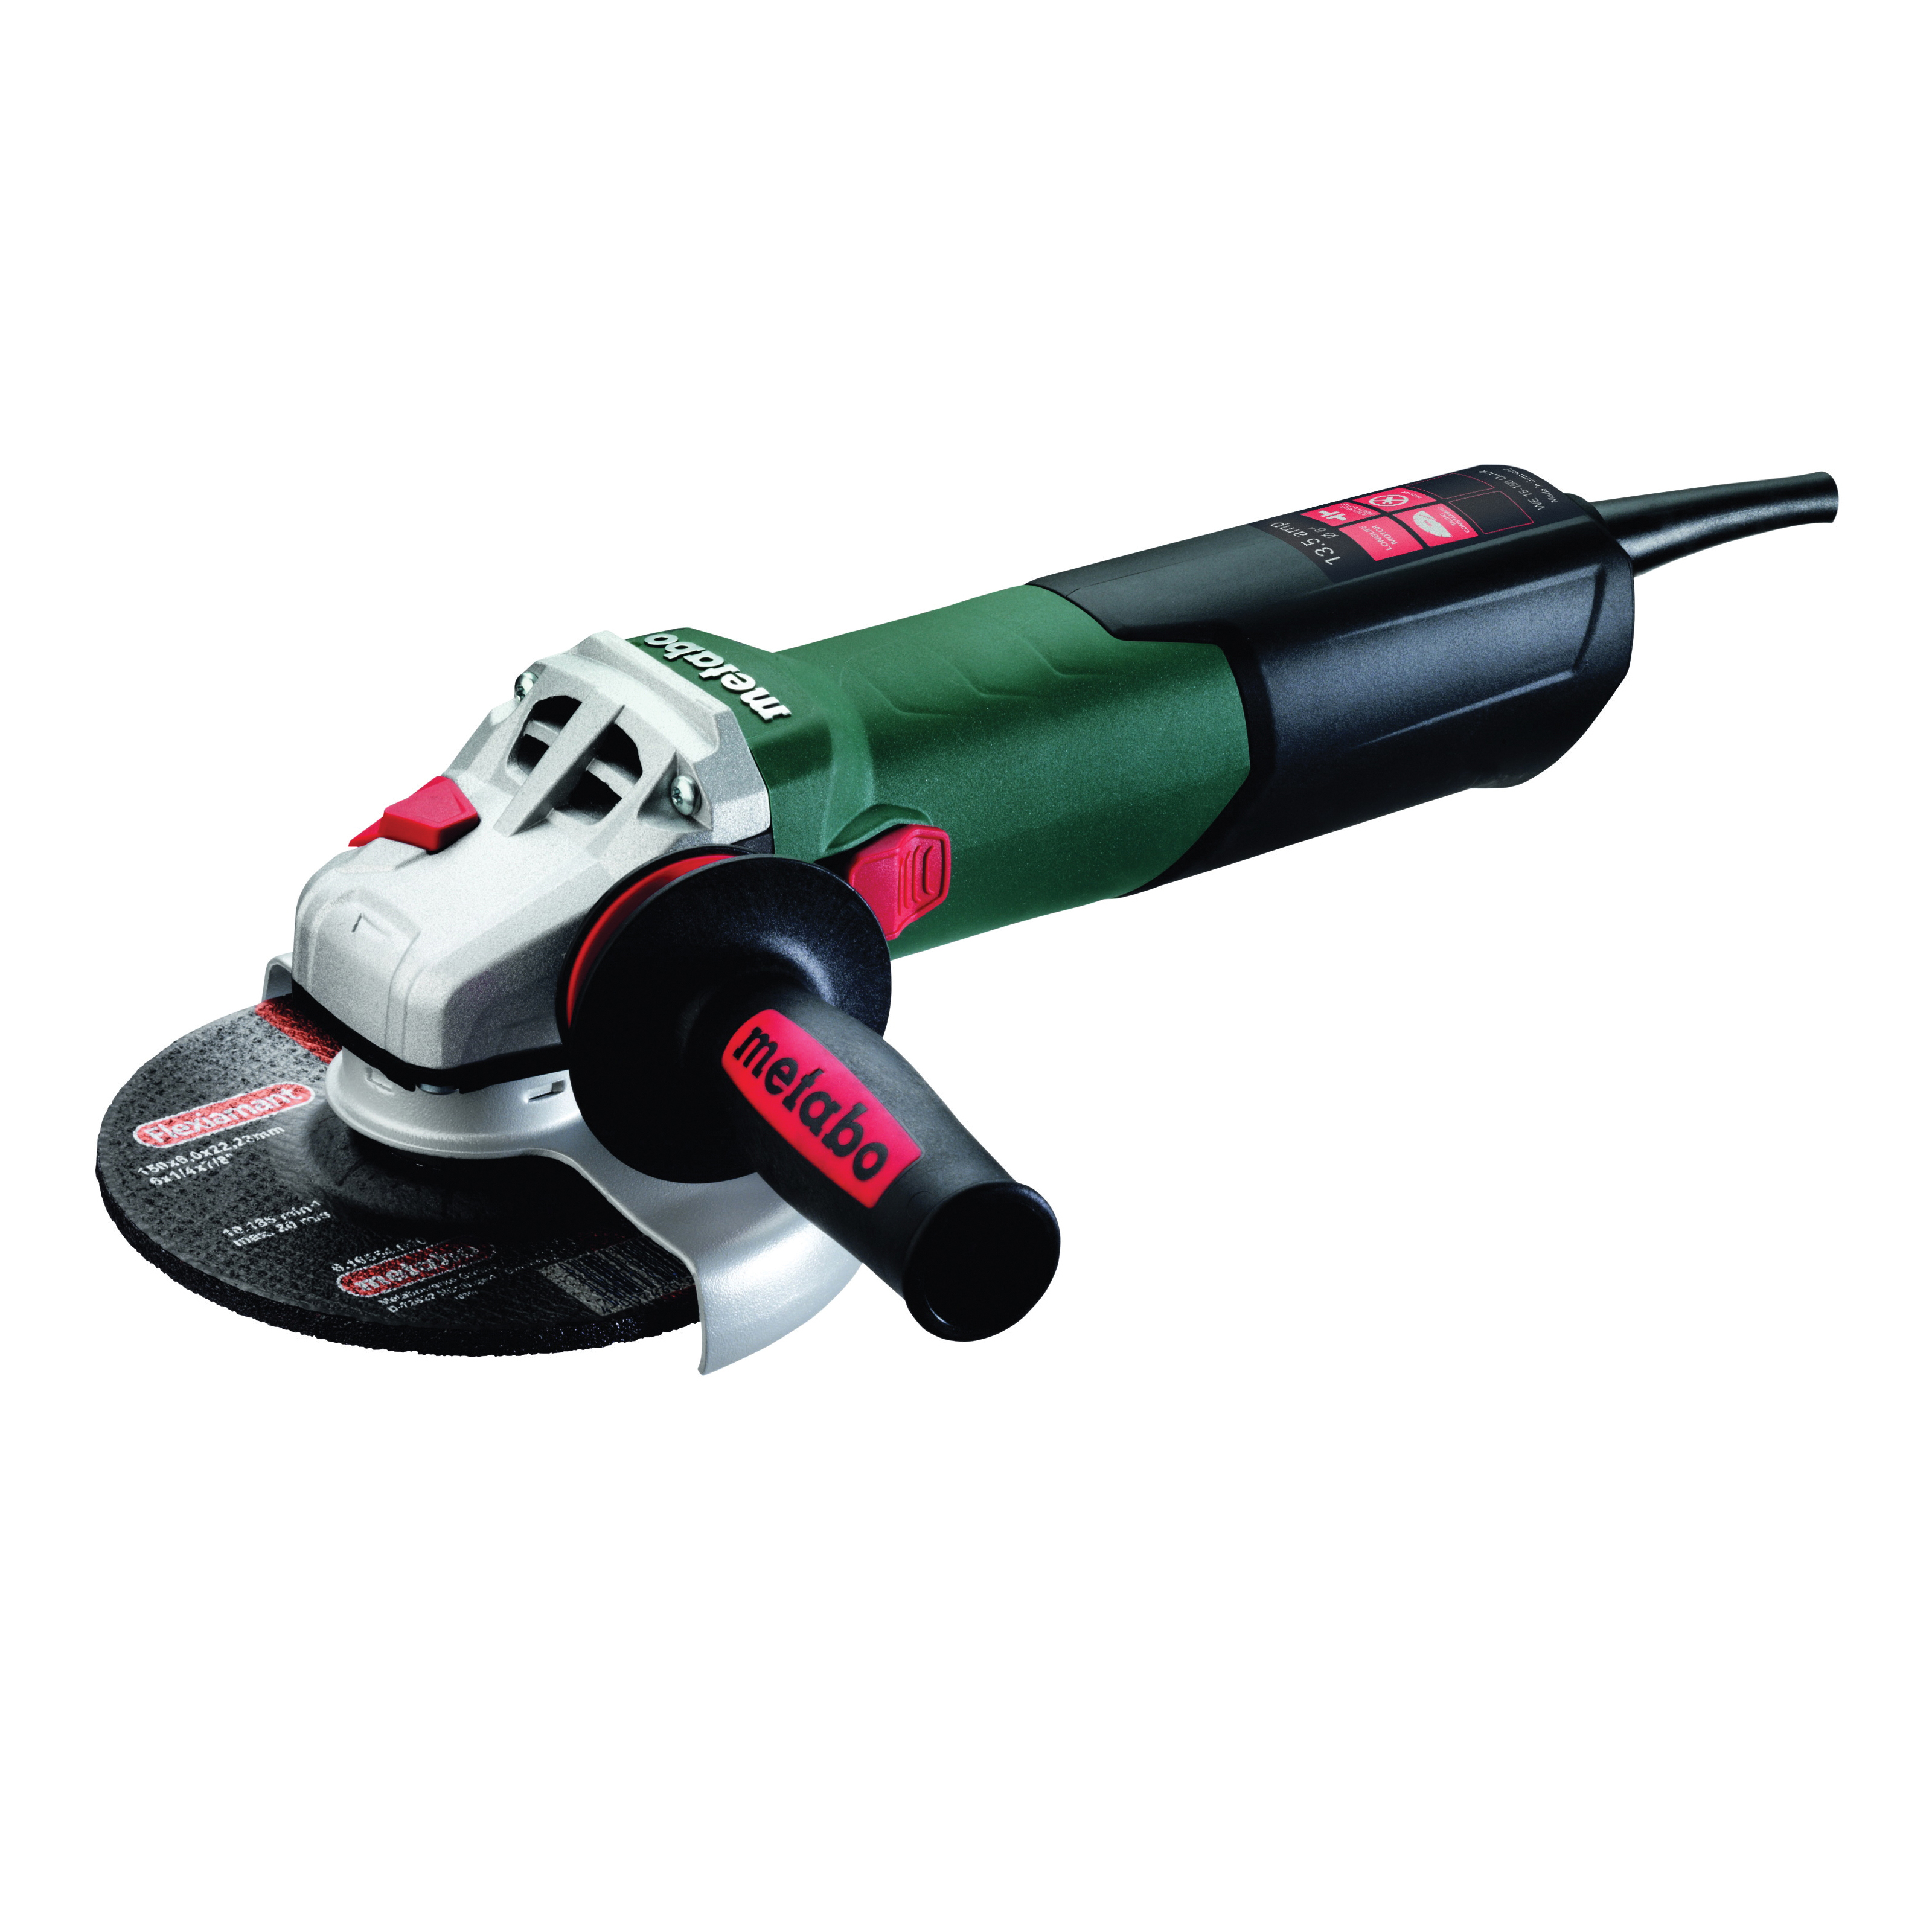 metabo® 600448420 Electric Angle Grinder, 5 in Dia Wheel, 5/8-11 UNC Arbor/Shank, 110 to 120 VAC